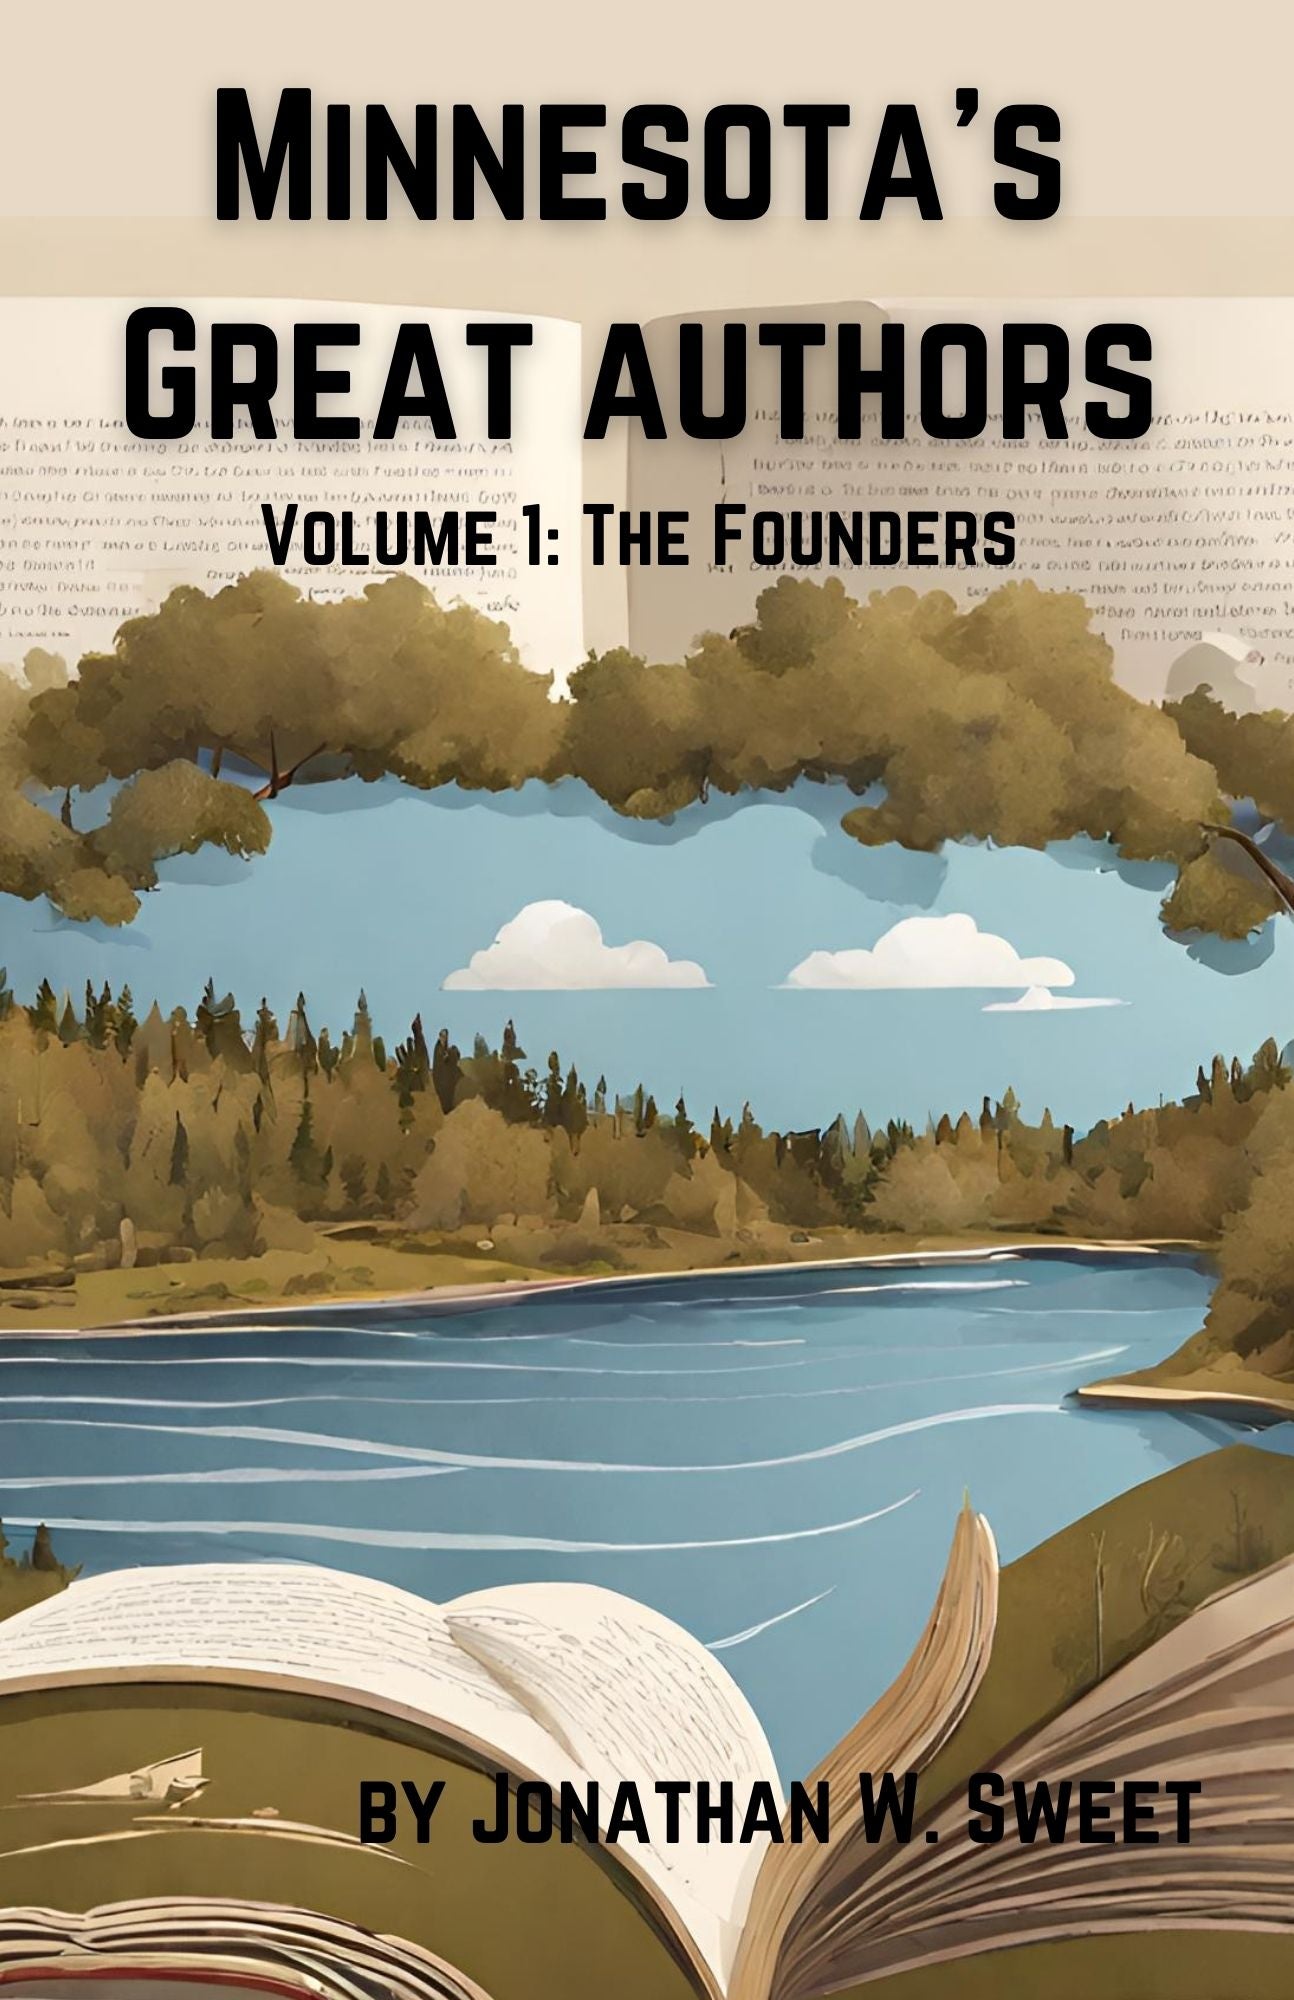 Minnesota's Greatest Authors by Jonathan W. Sweet (signed)